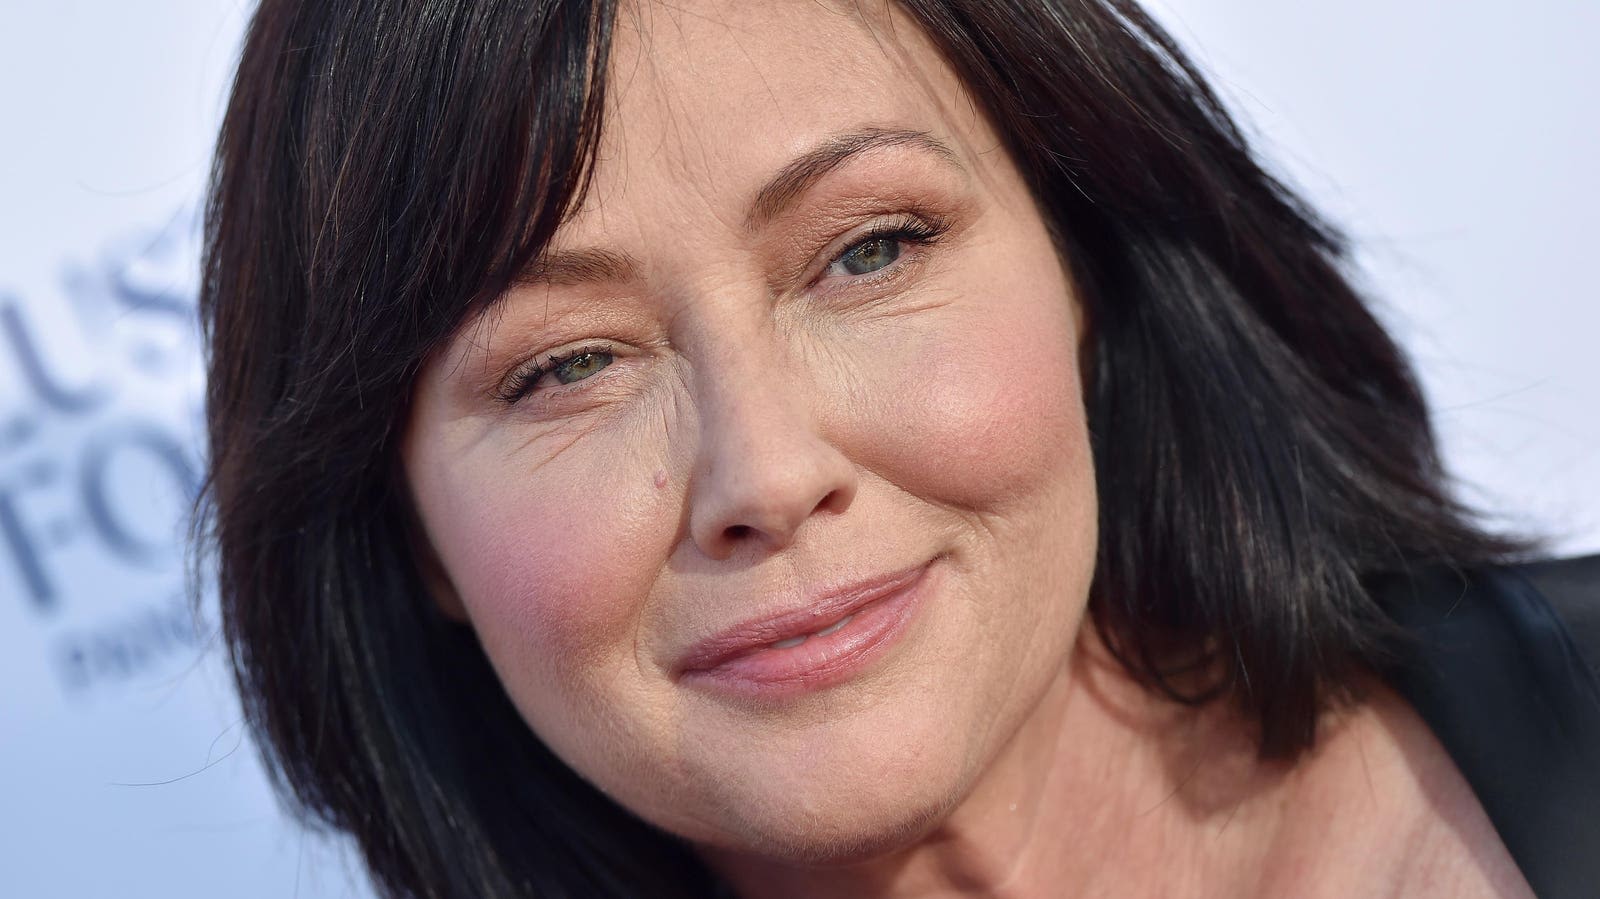 Shannen Doherty’s Untimely Death Sparks Important Conversations About Healthcare Access And Equity